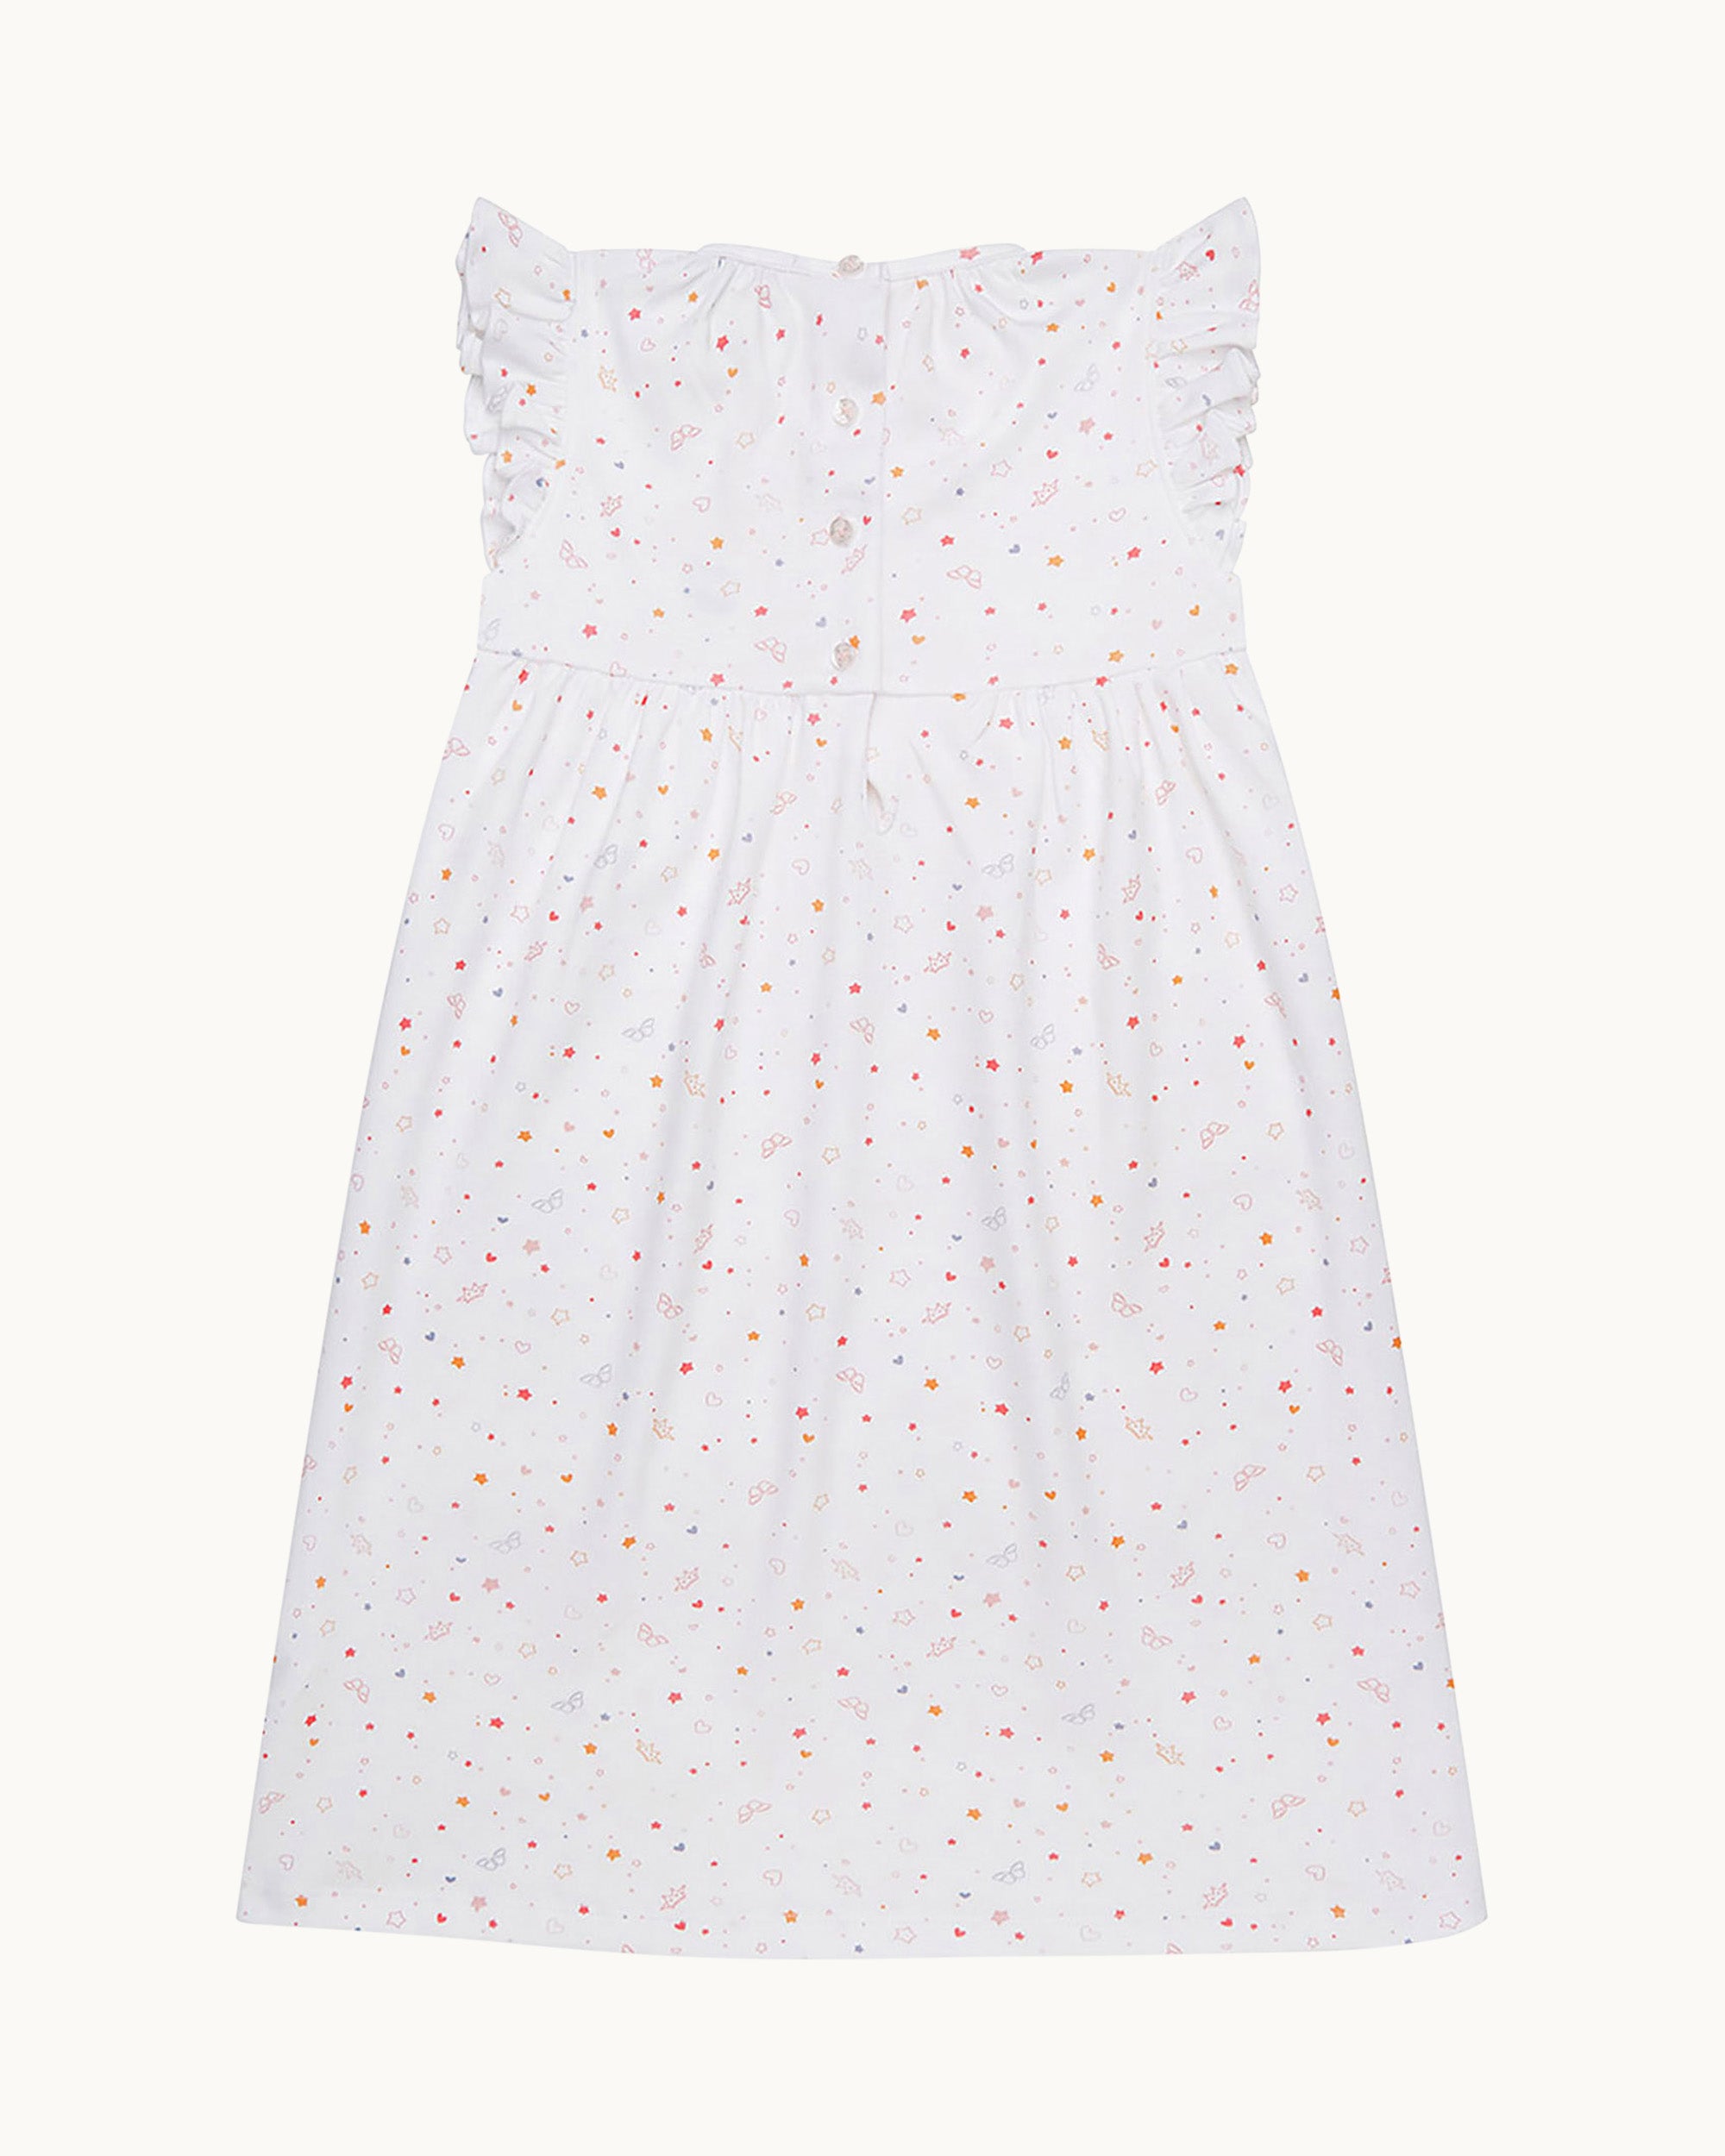 Star & Crown Nightgown - White & Pink